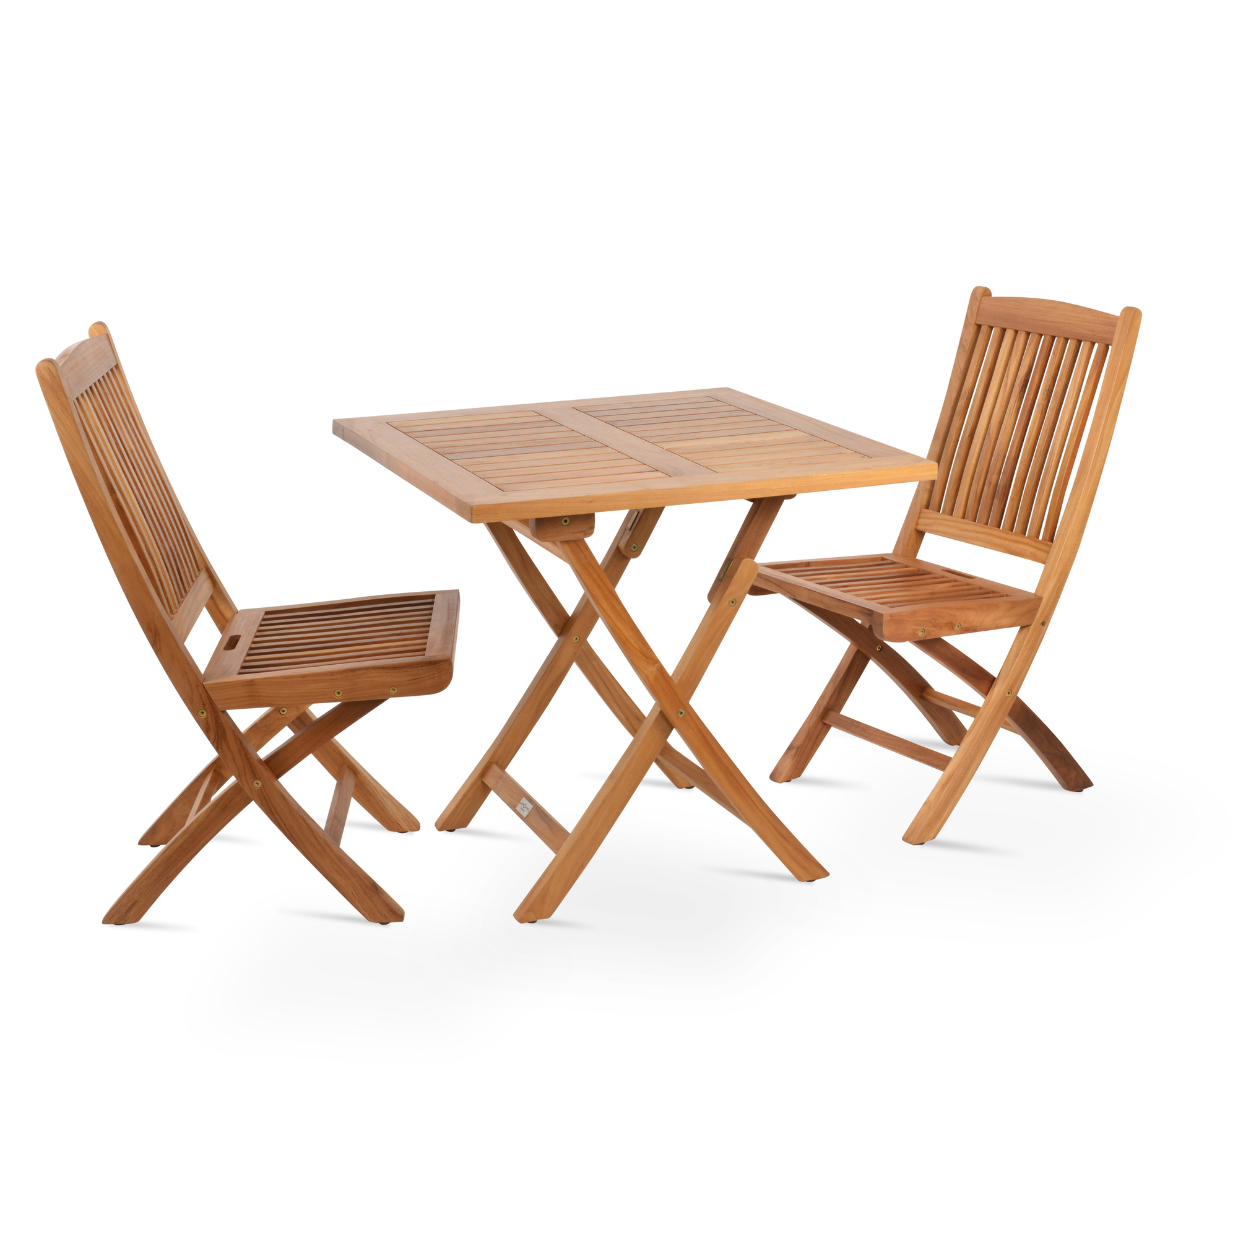 Teak Patio Table and Chairs